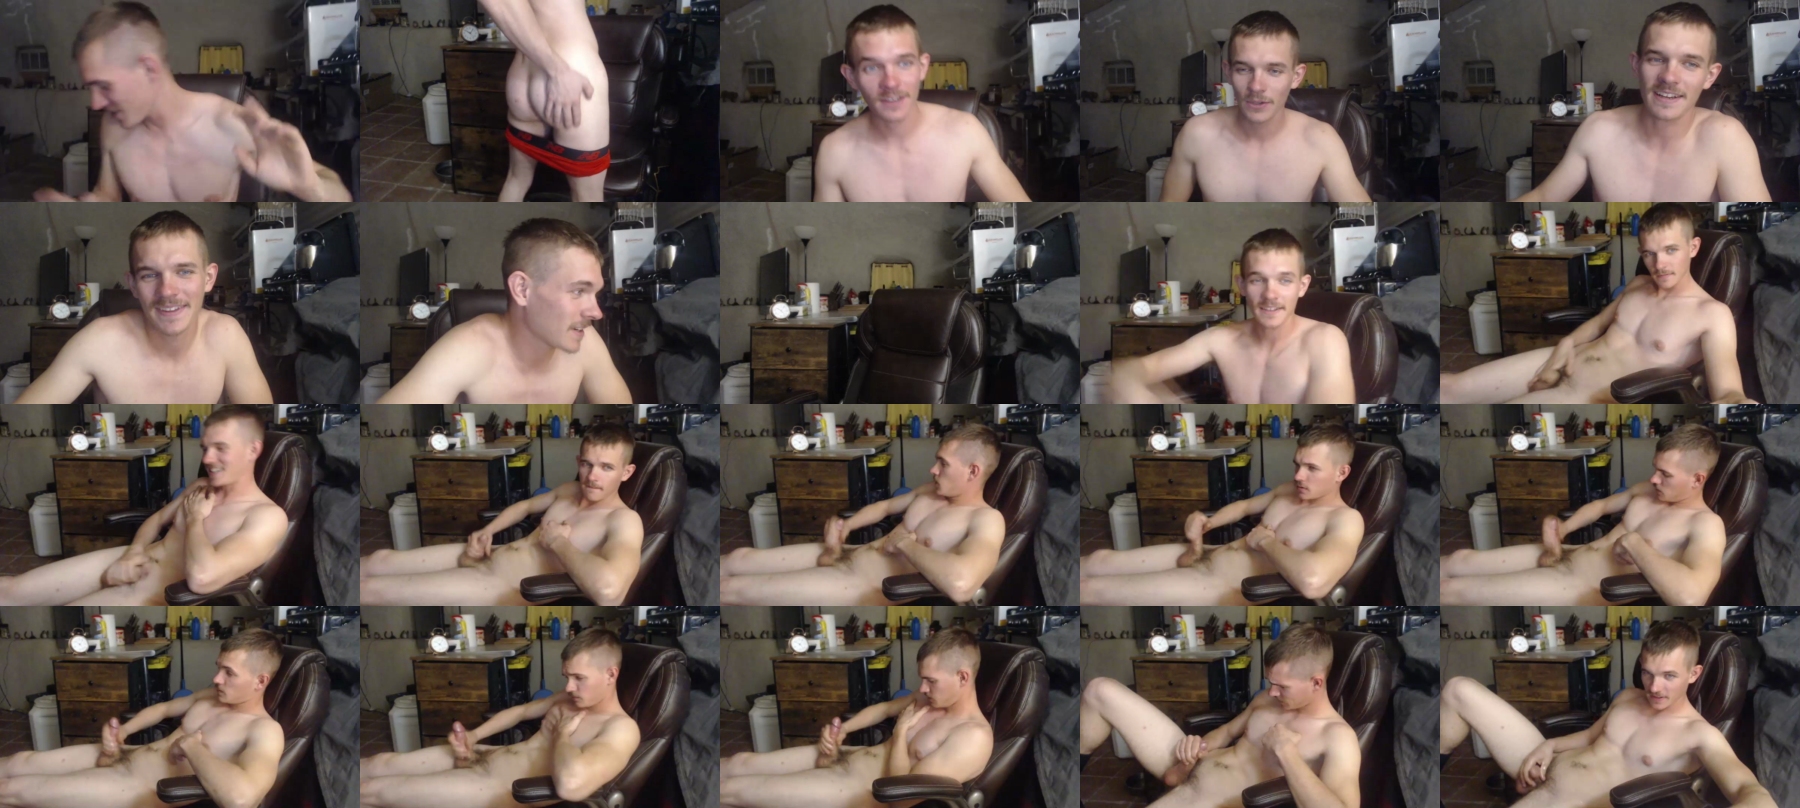 Ethansxxx  04-11-2021 Male Topless